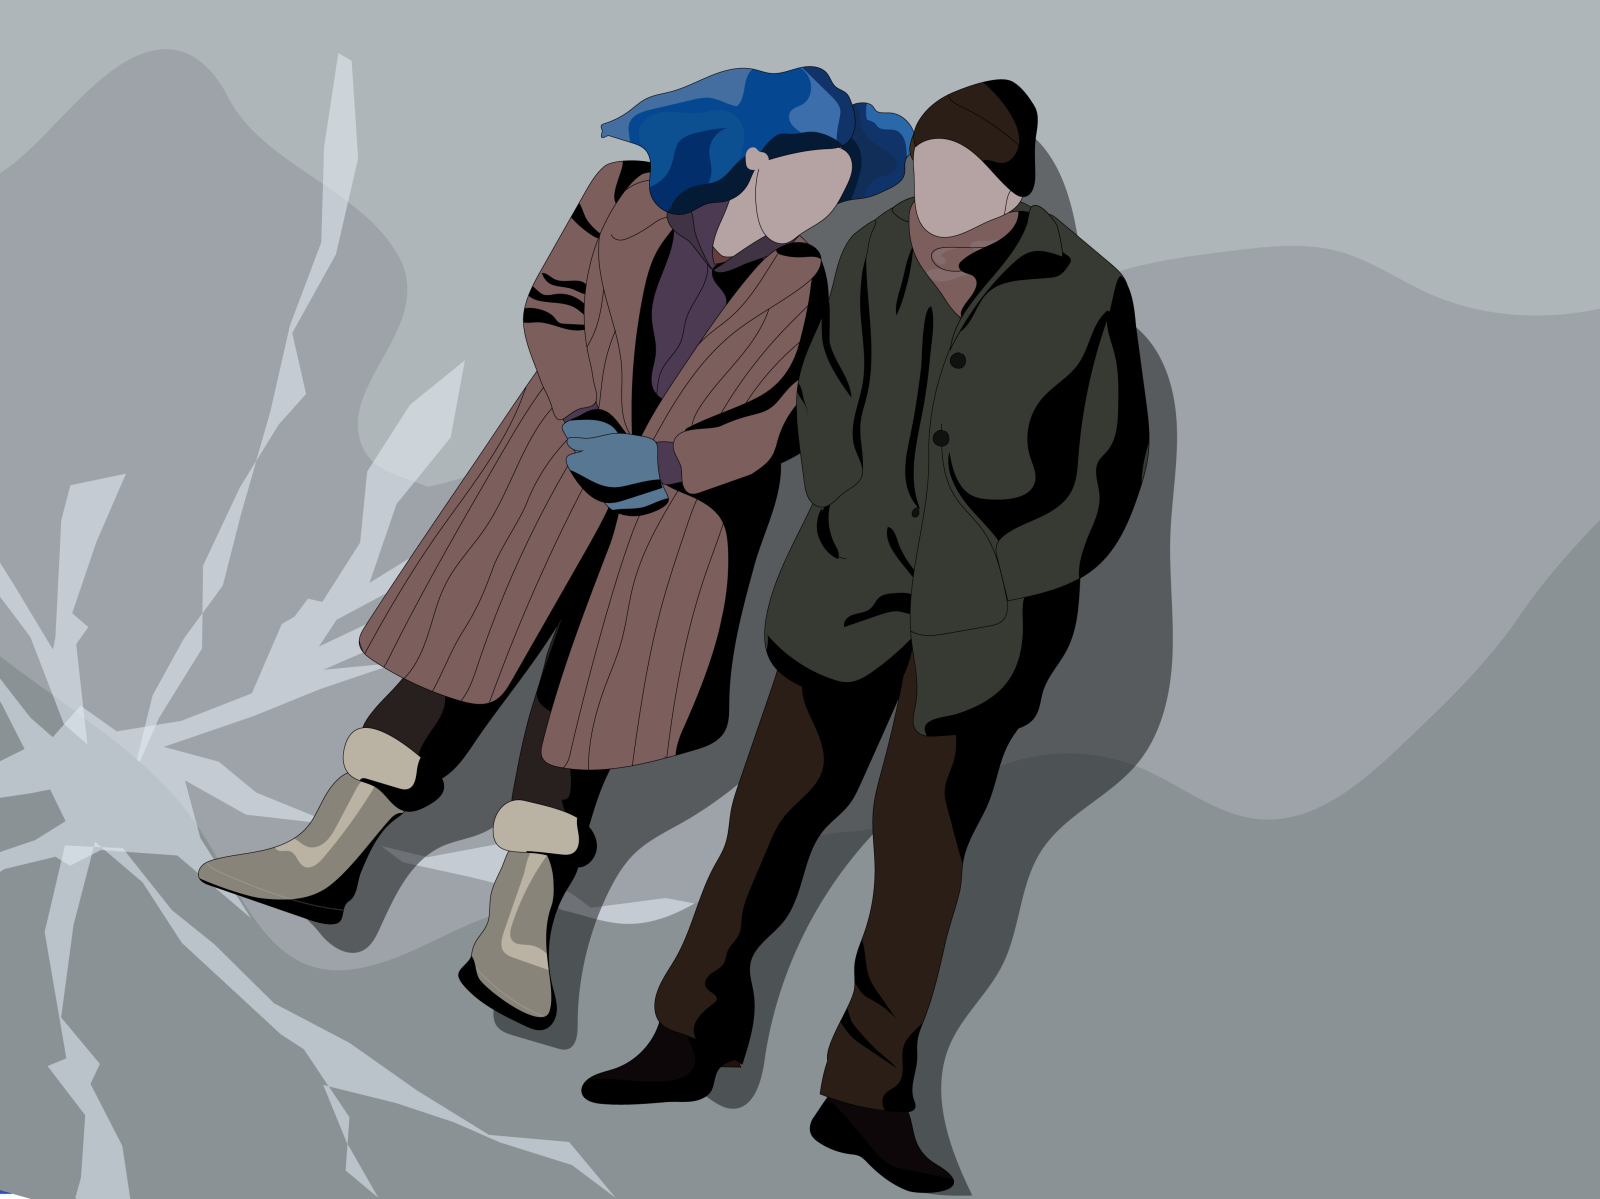 eternal sunshine of the spotless mind download